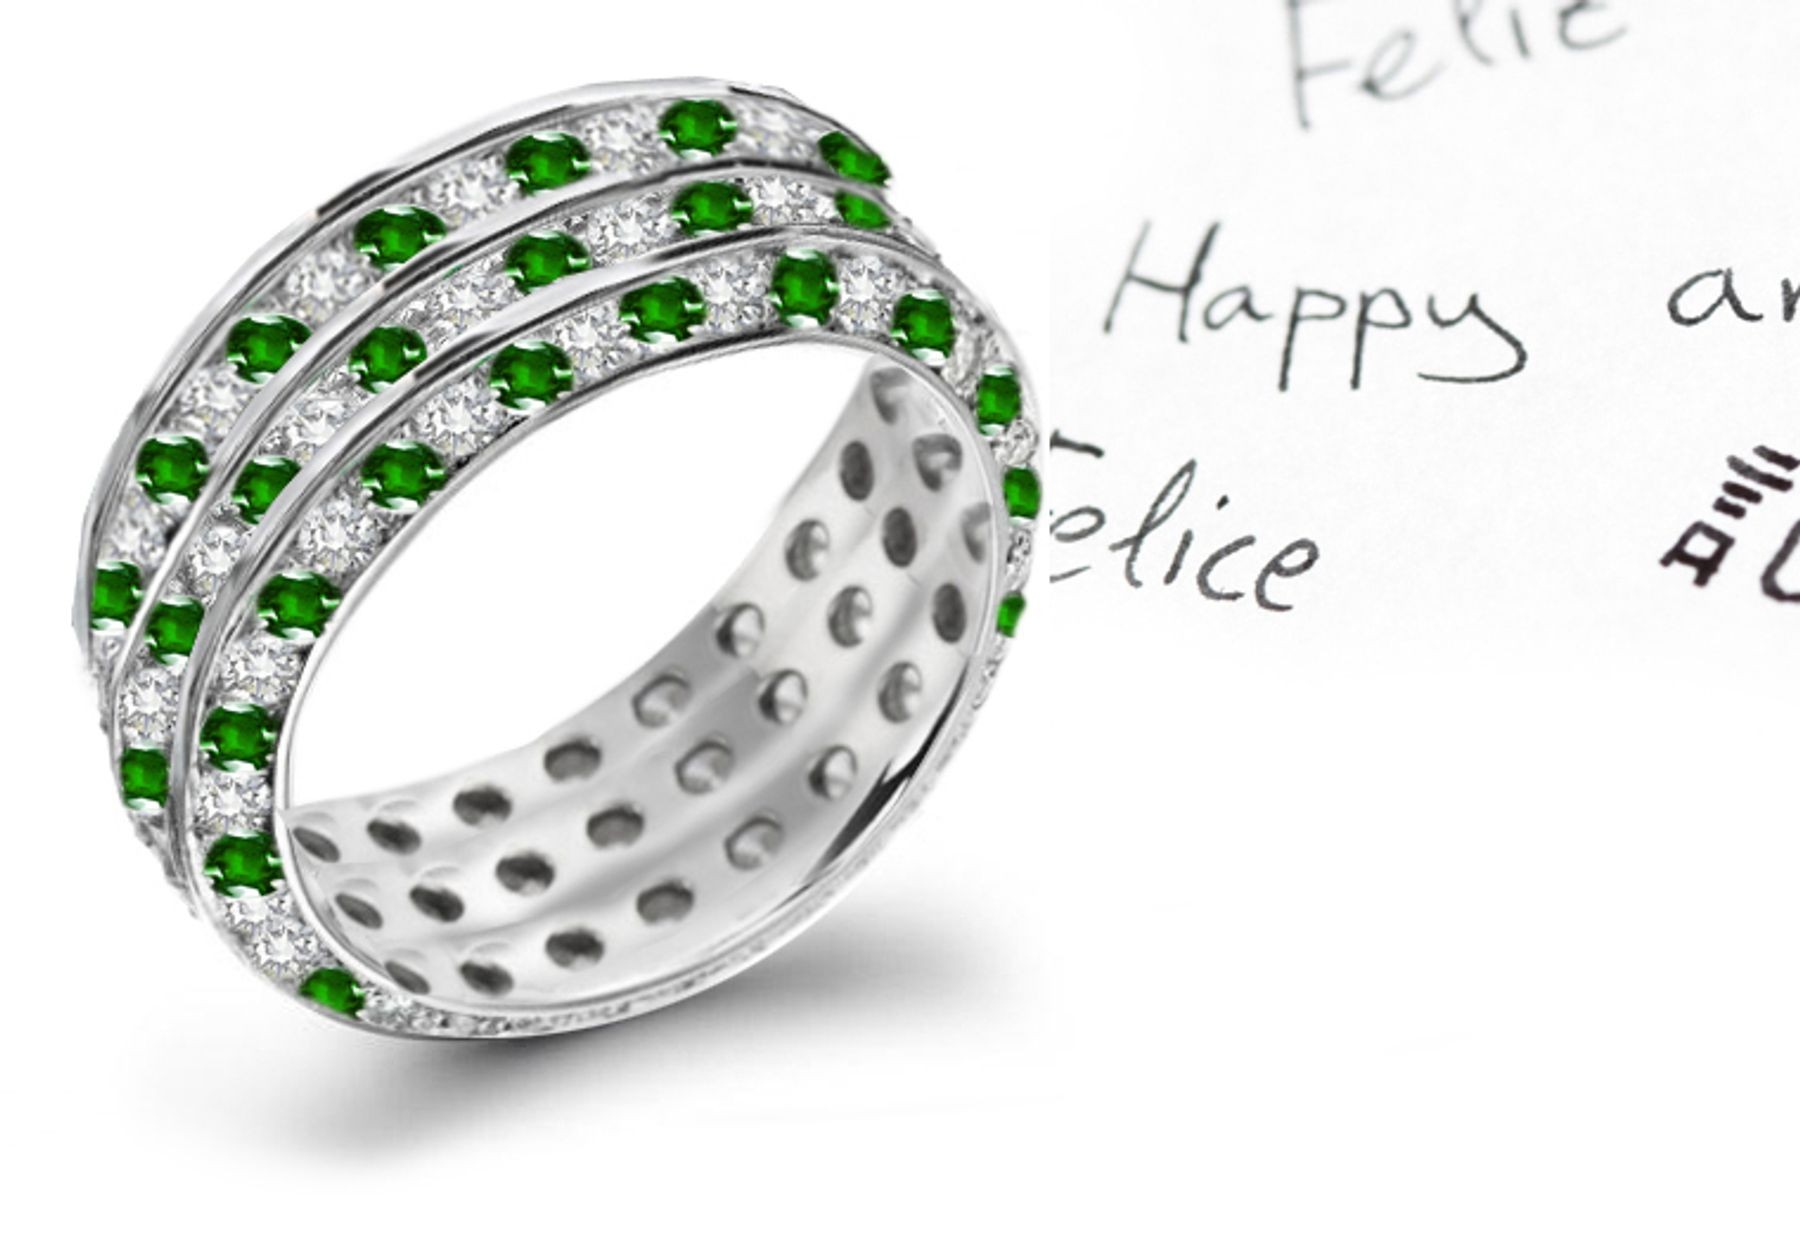 "Perfection in details": Endless Love Emerald Diamond Eternity Wedding Ring More Brightly Illuminated in Sun Light